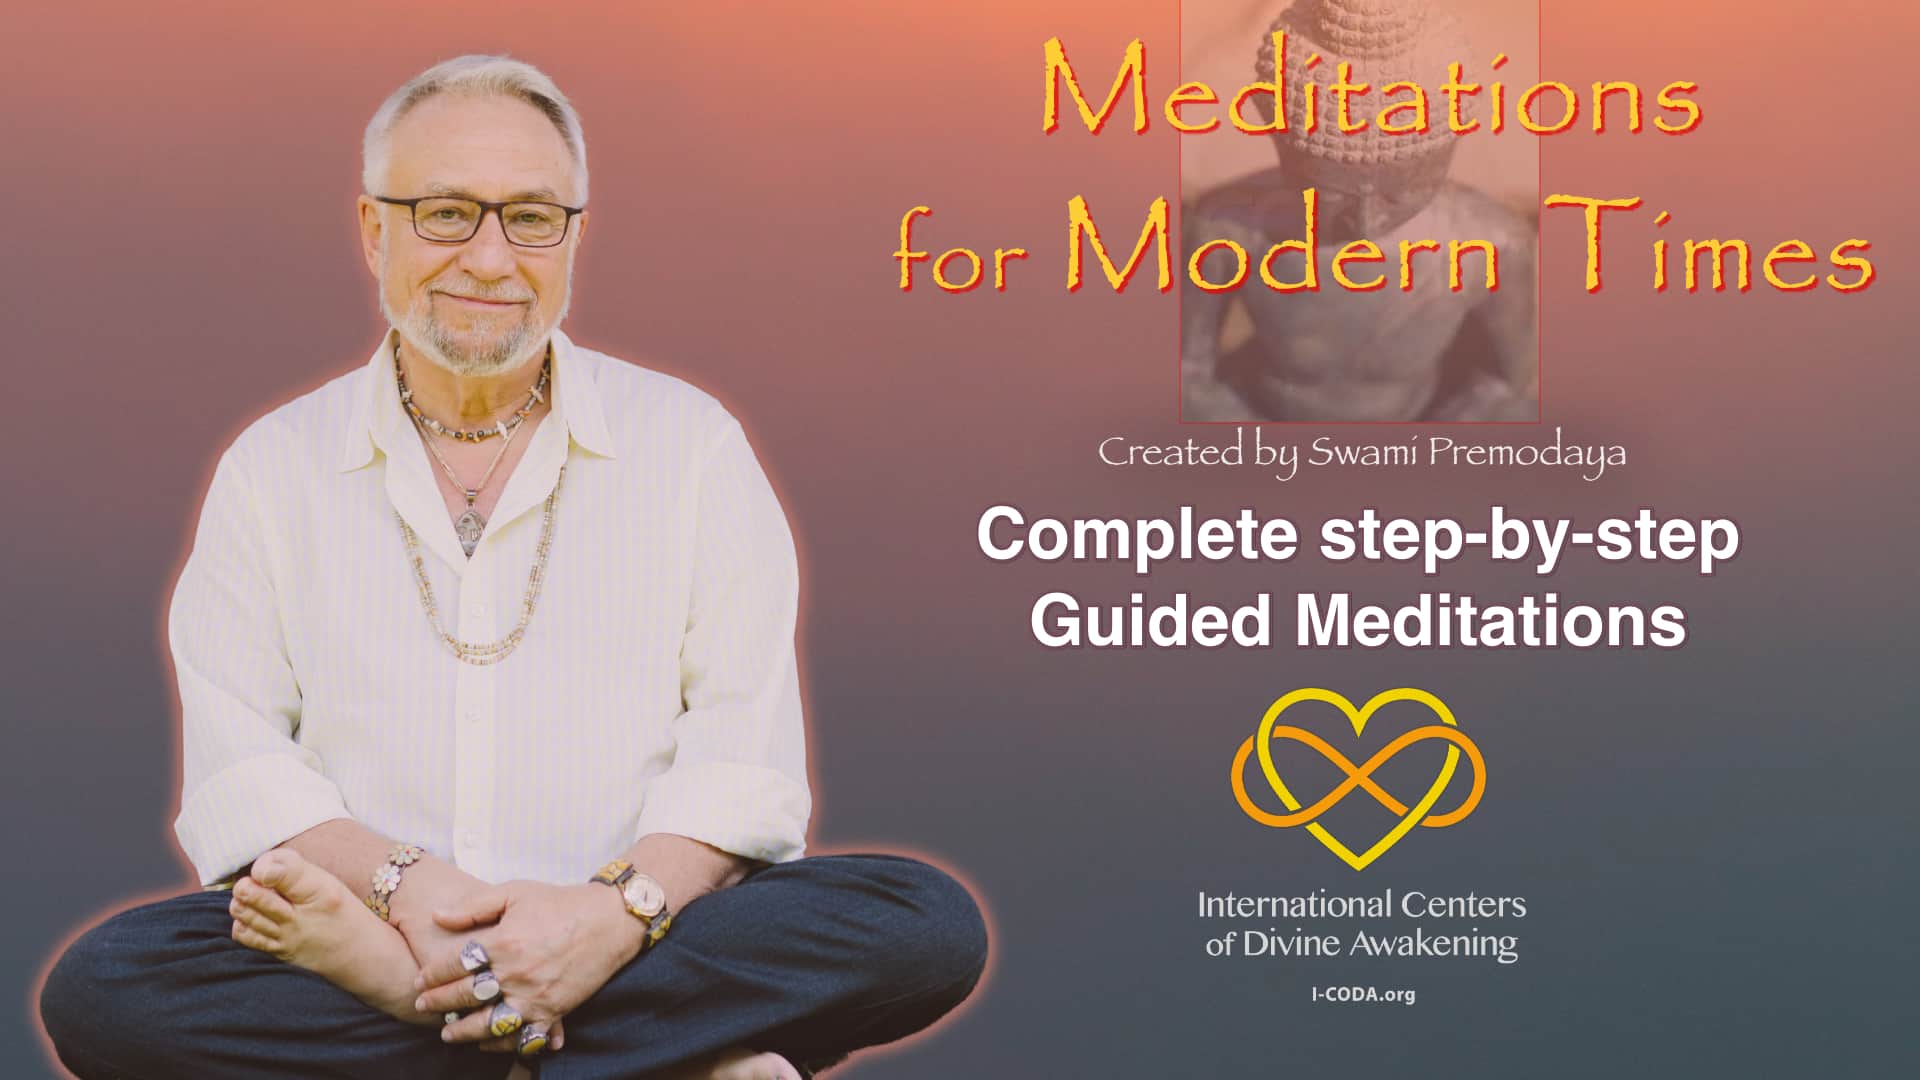 Meditations for Modern Times, guided meditations created by Swami Premodaya